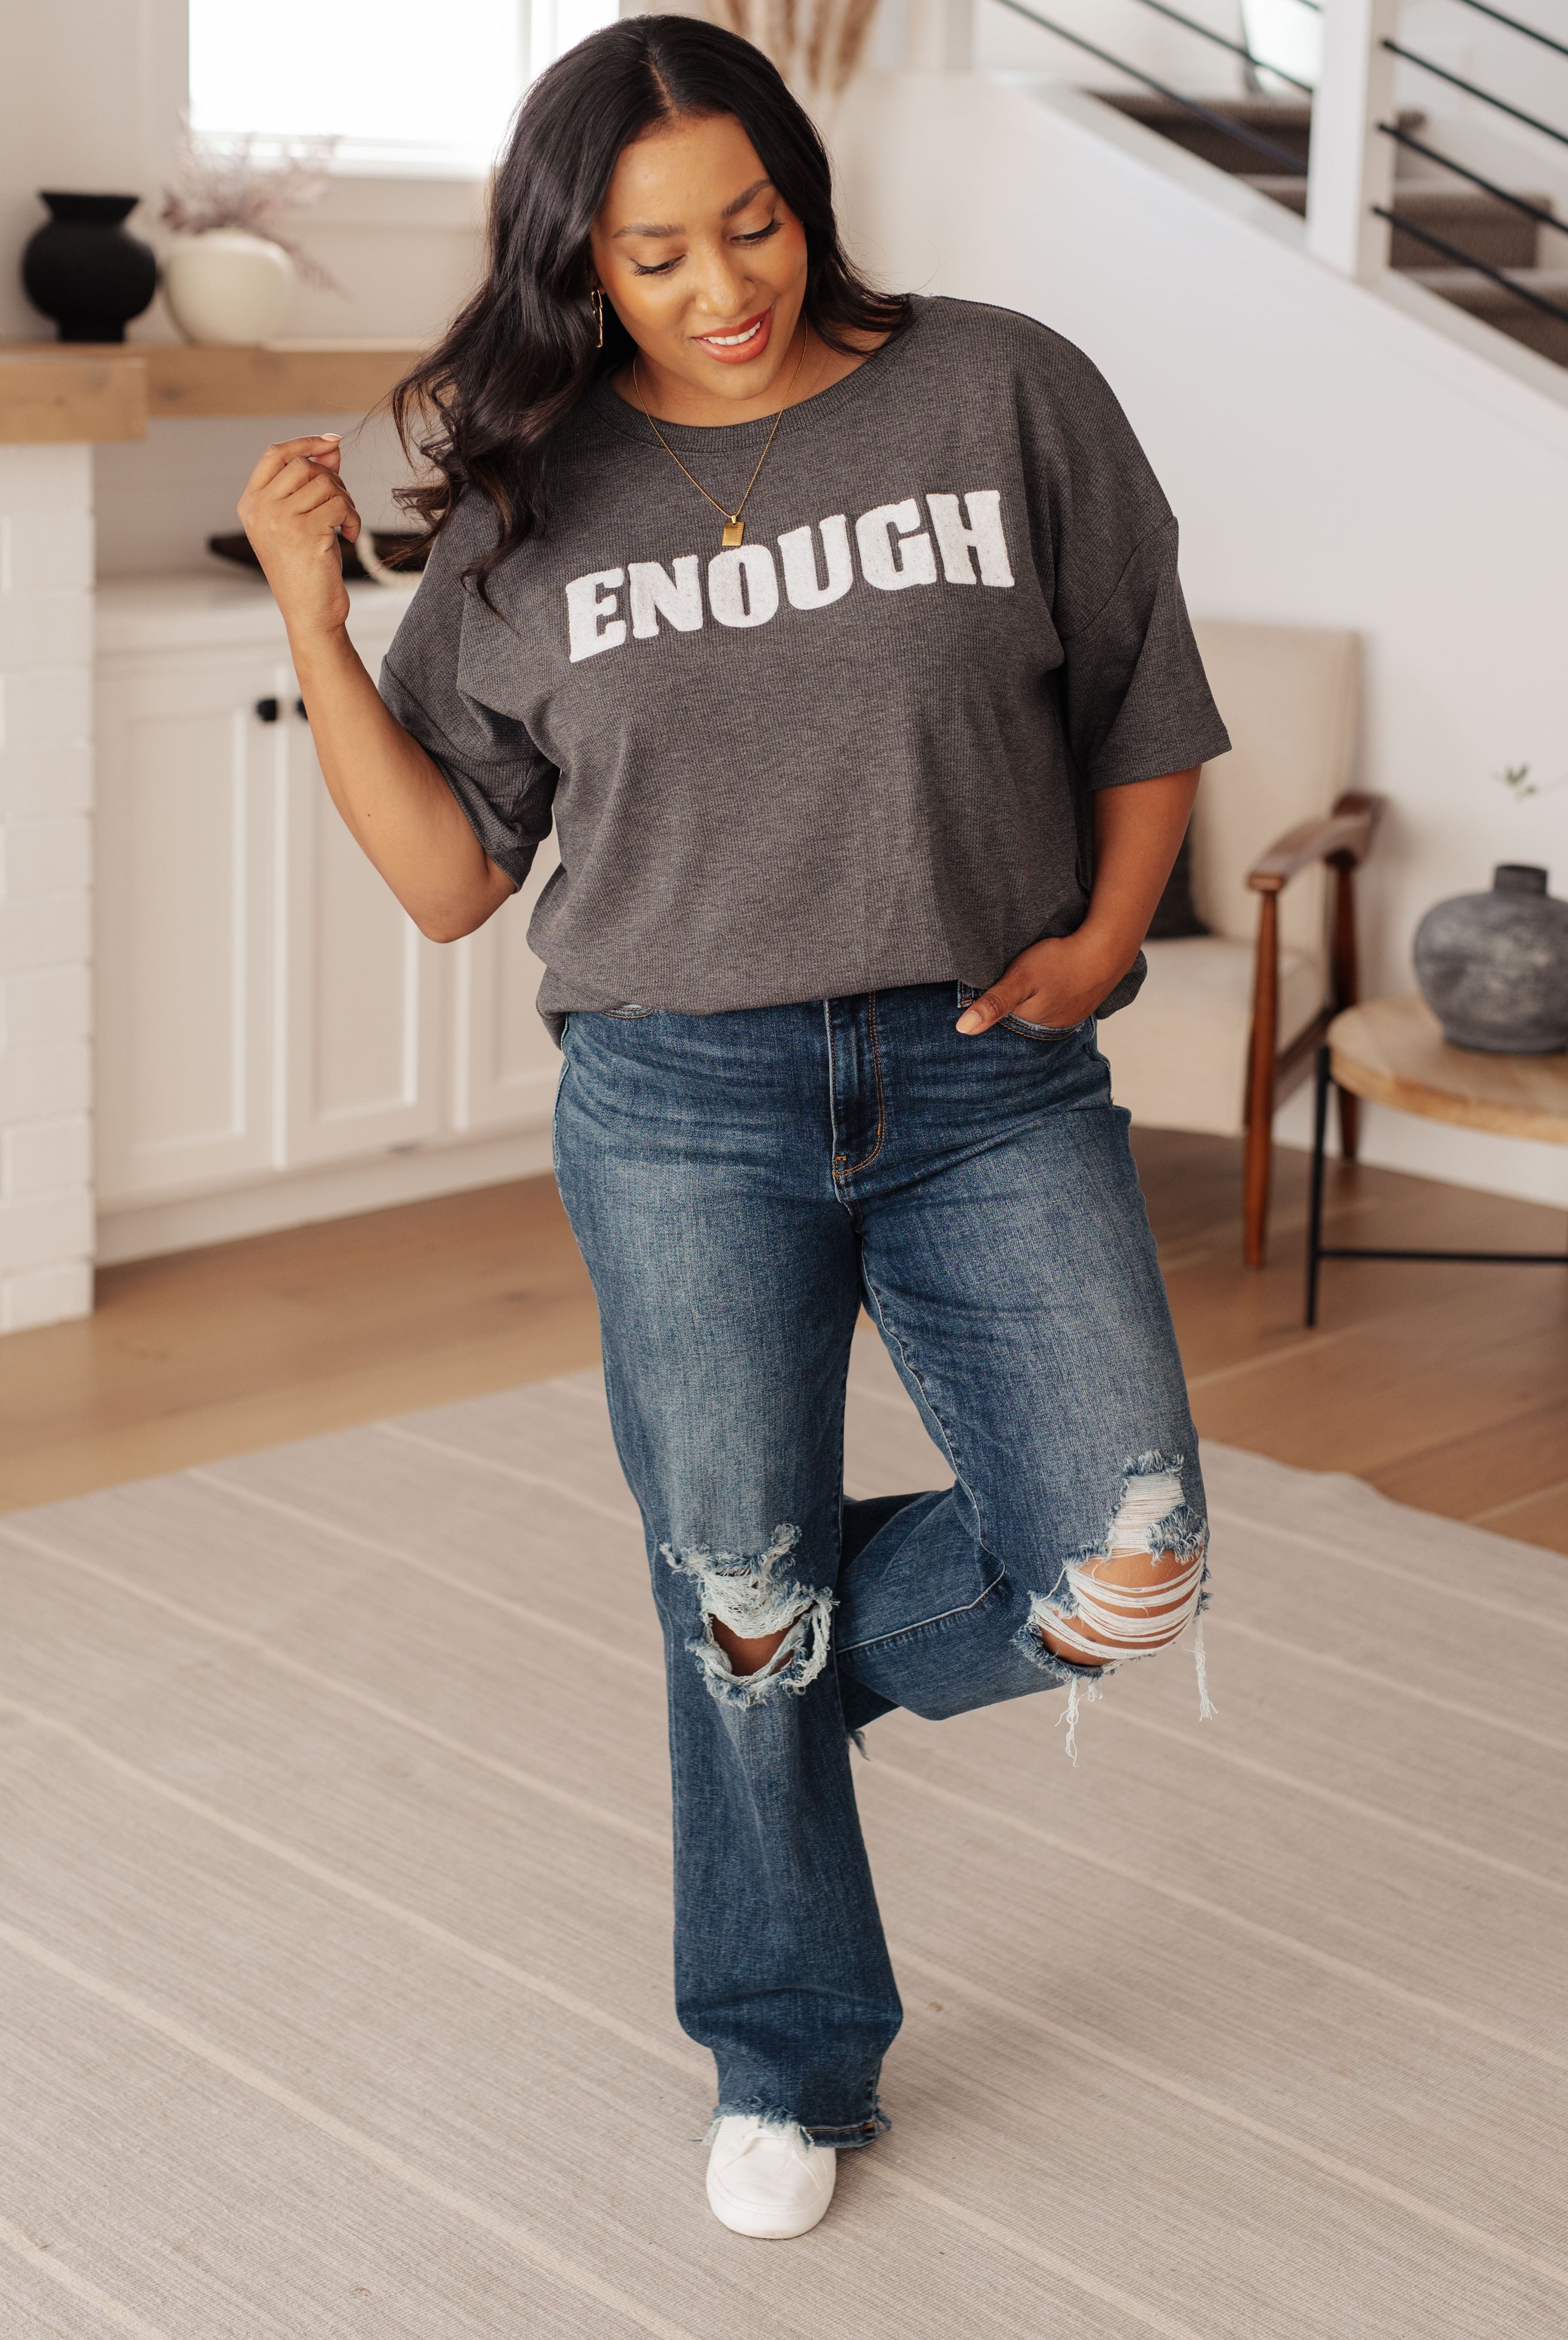 Always Enough Graphic Tee in Charcoal-Graphic Tees-Ave Shops-Urban Threadz Boutique, Women's Fashion Boutique in Saugatuck, MI